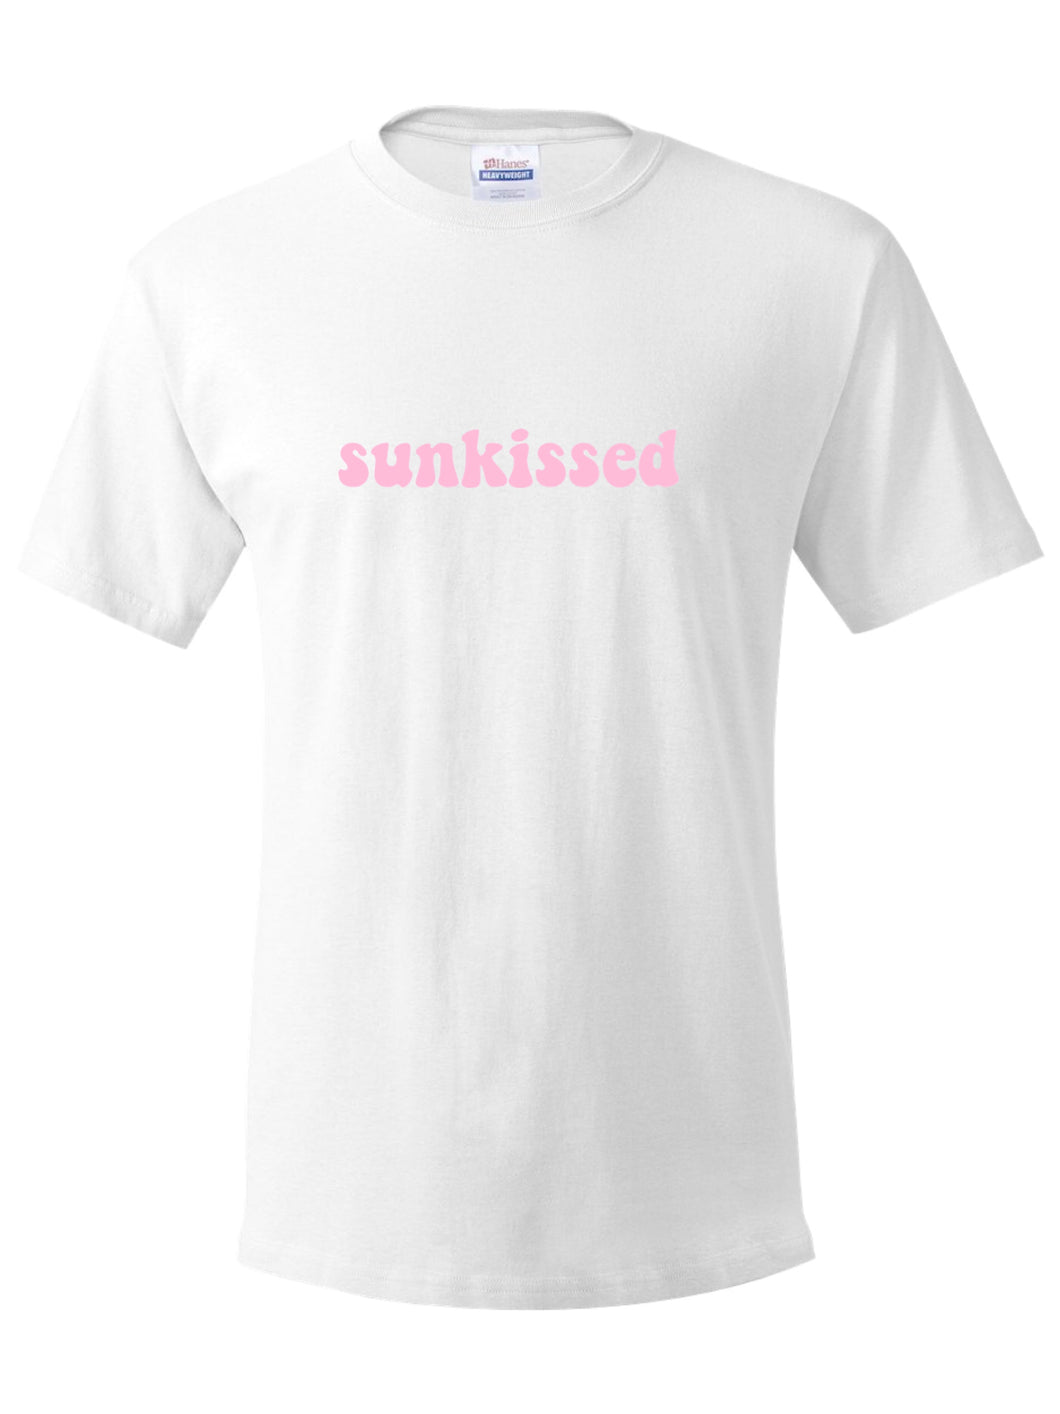 SUNKISSED T-SHIRT